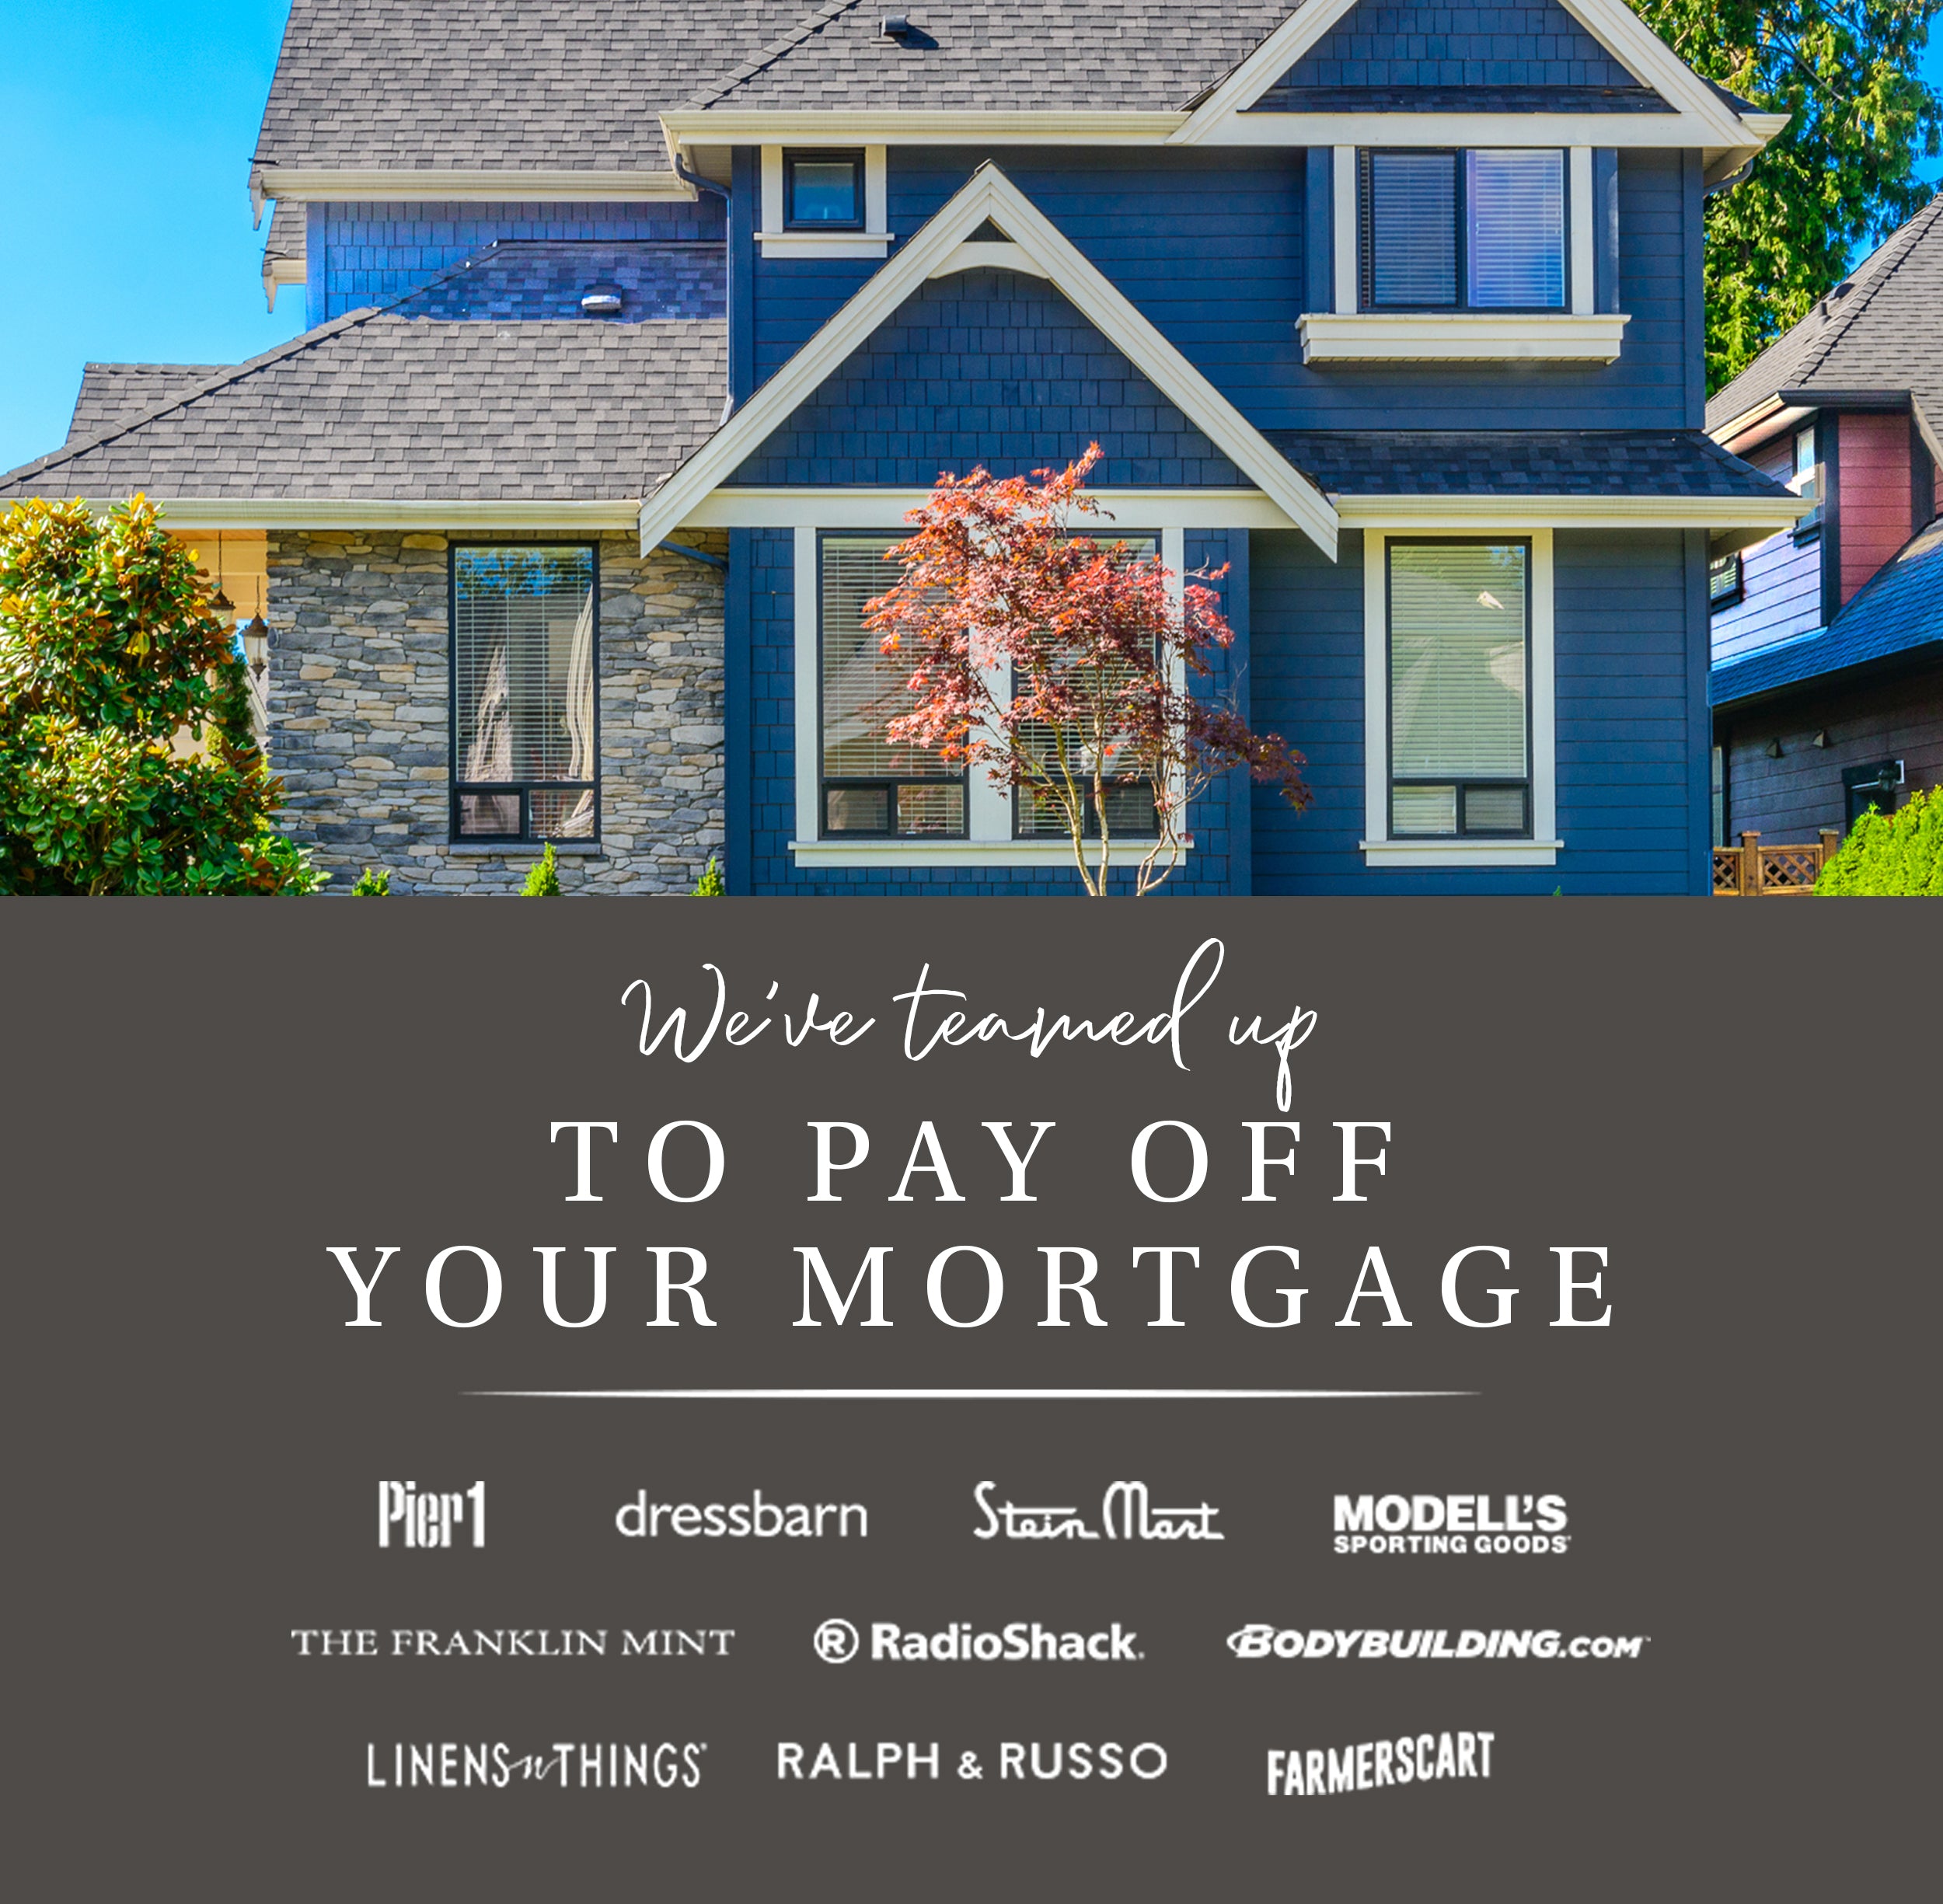 PAY OFF YOUR MORTGAGE™ 2022 SWEEPSTAKES